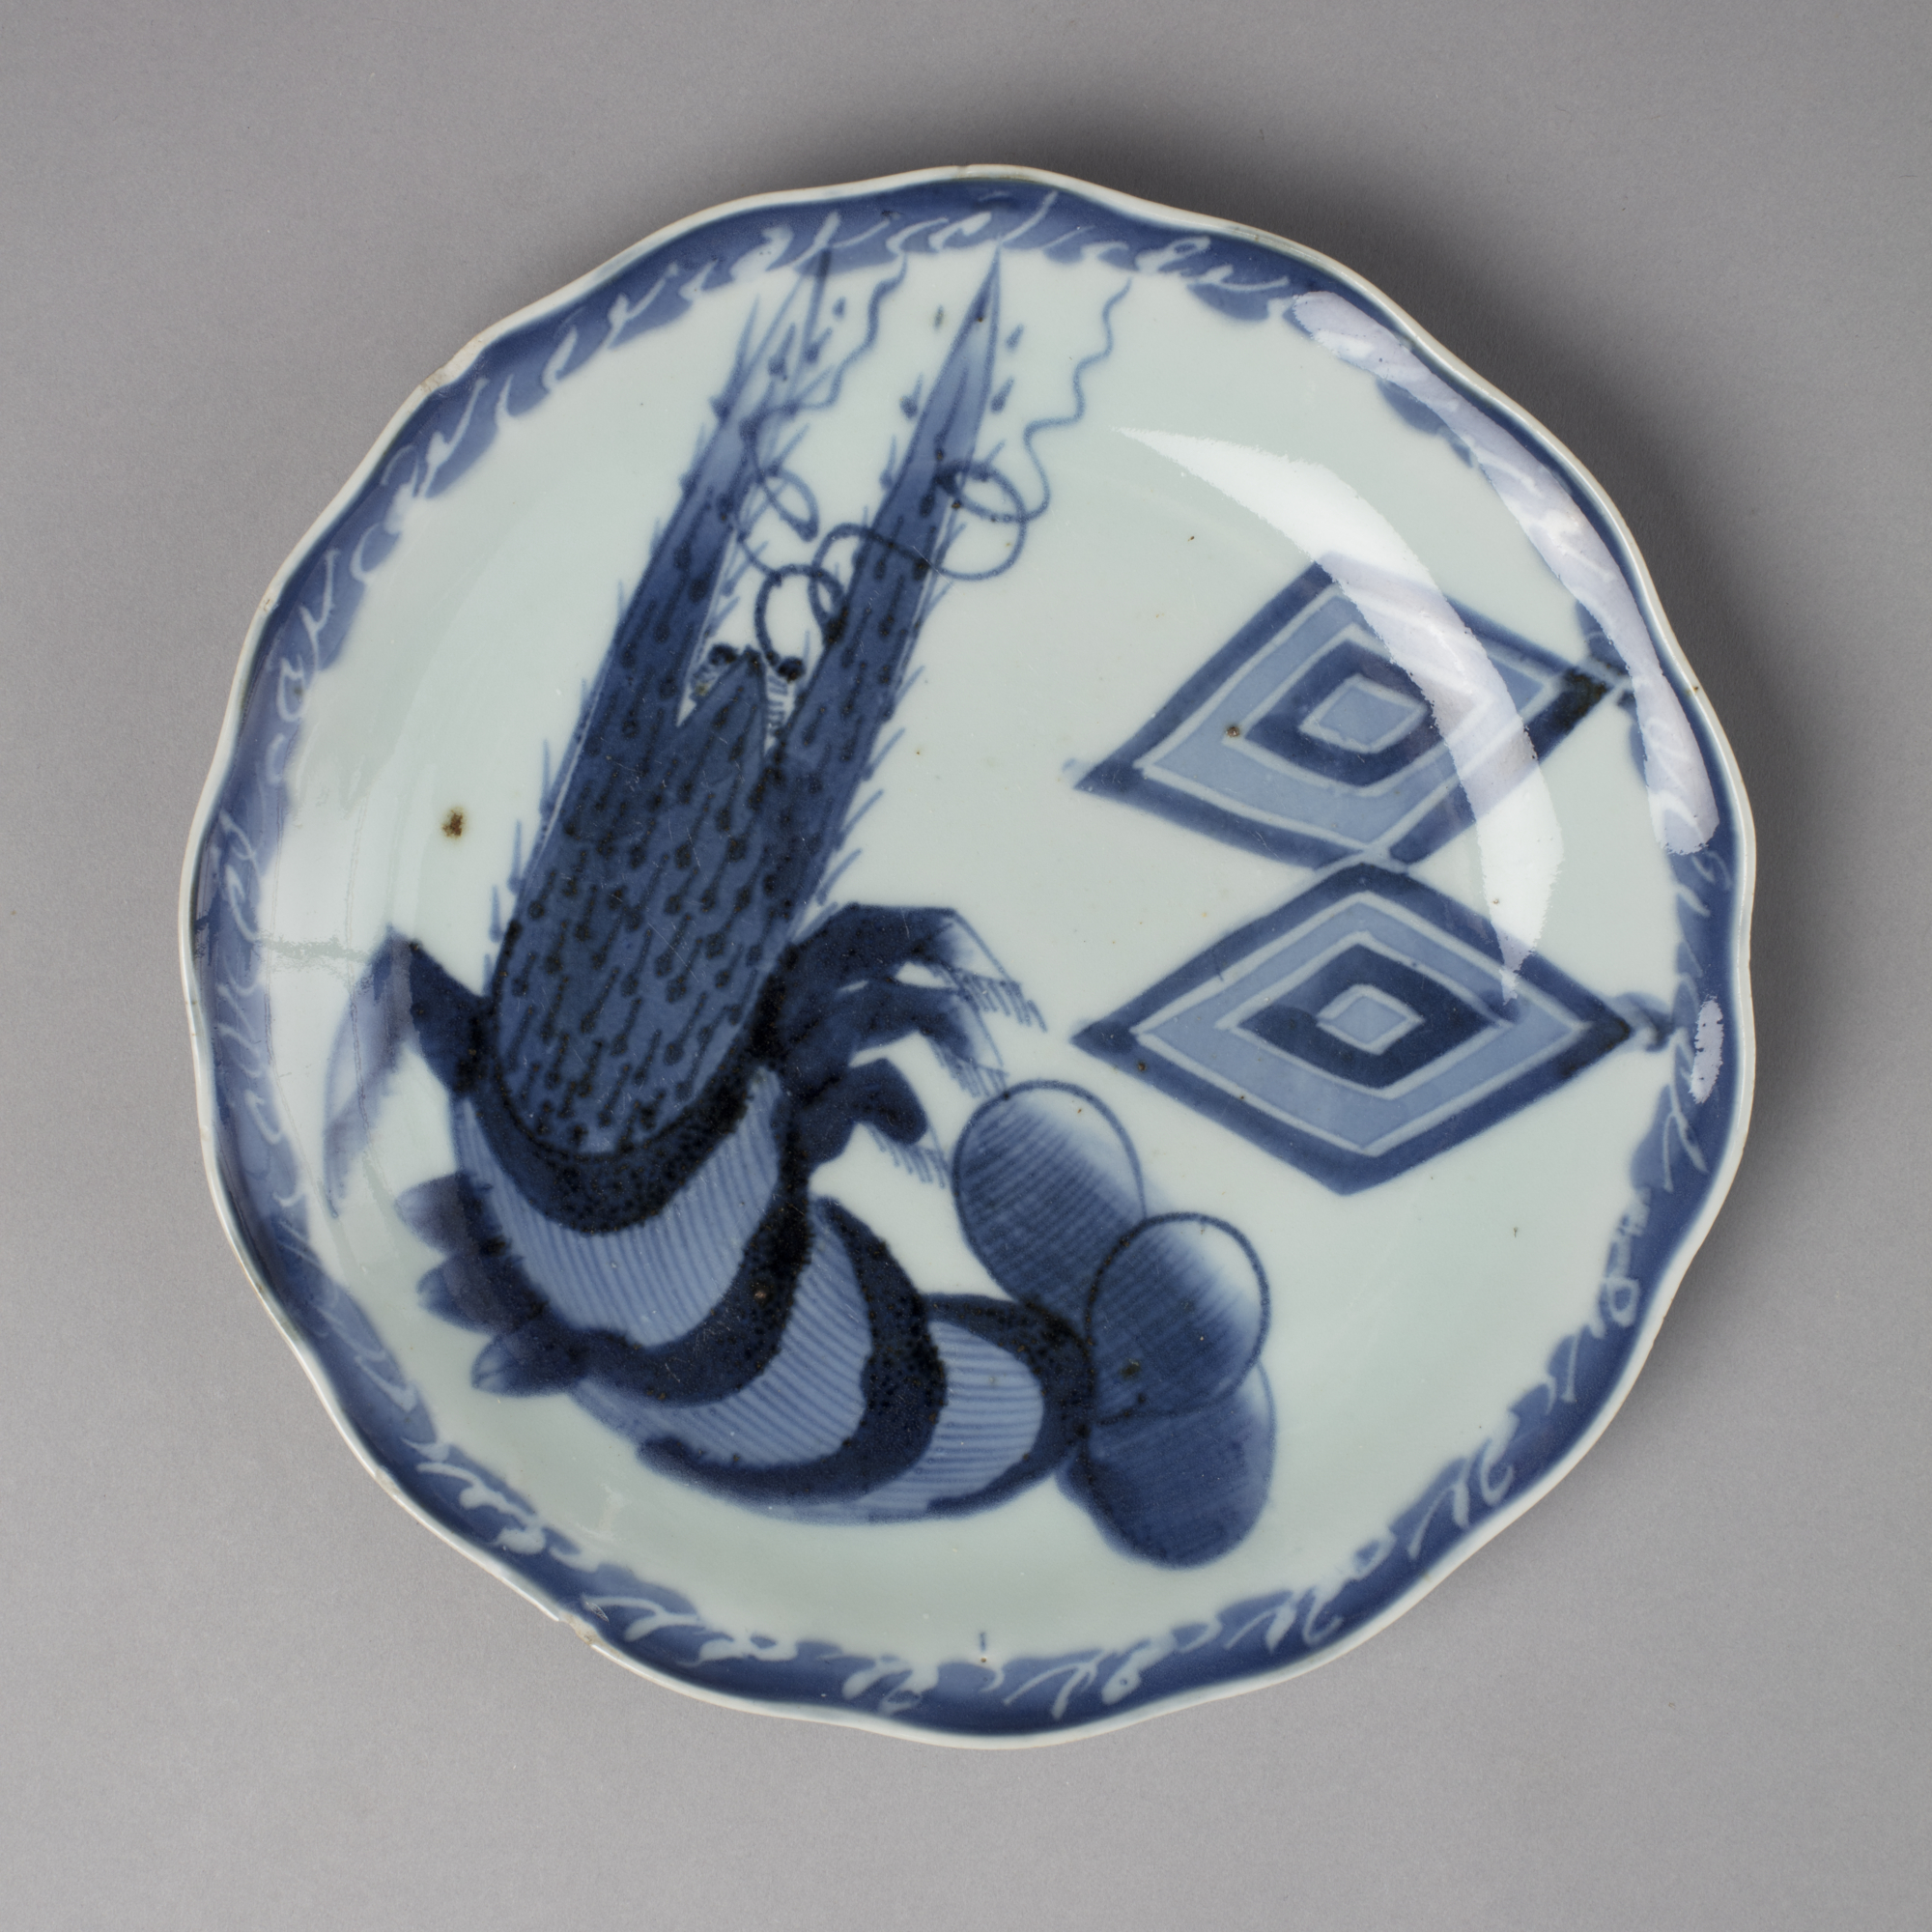 Dish with design of lobster and rice measure crests in blue on white